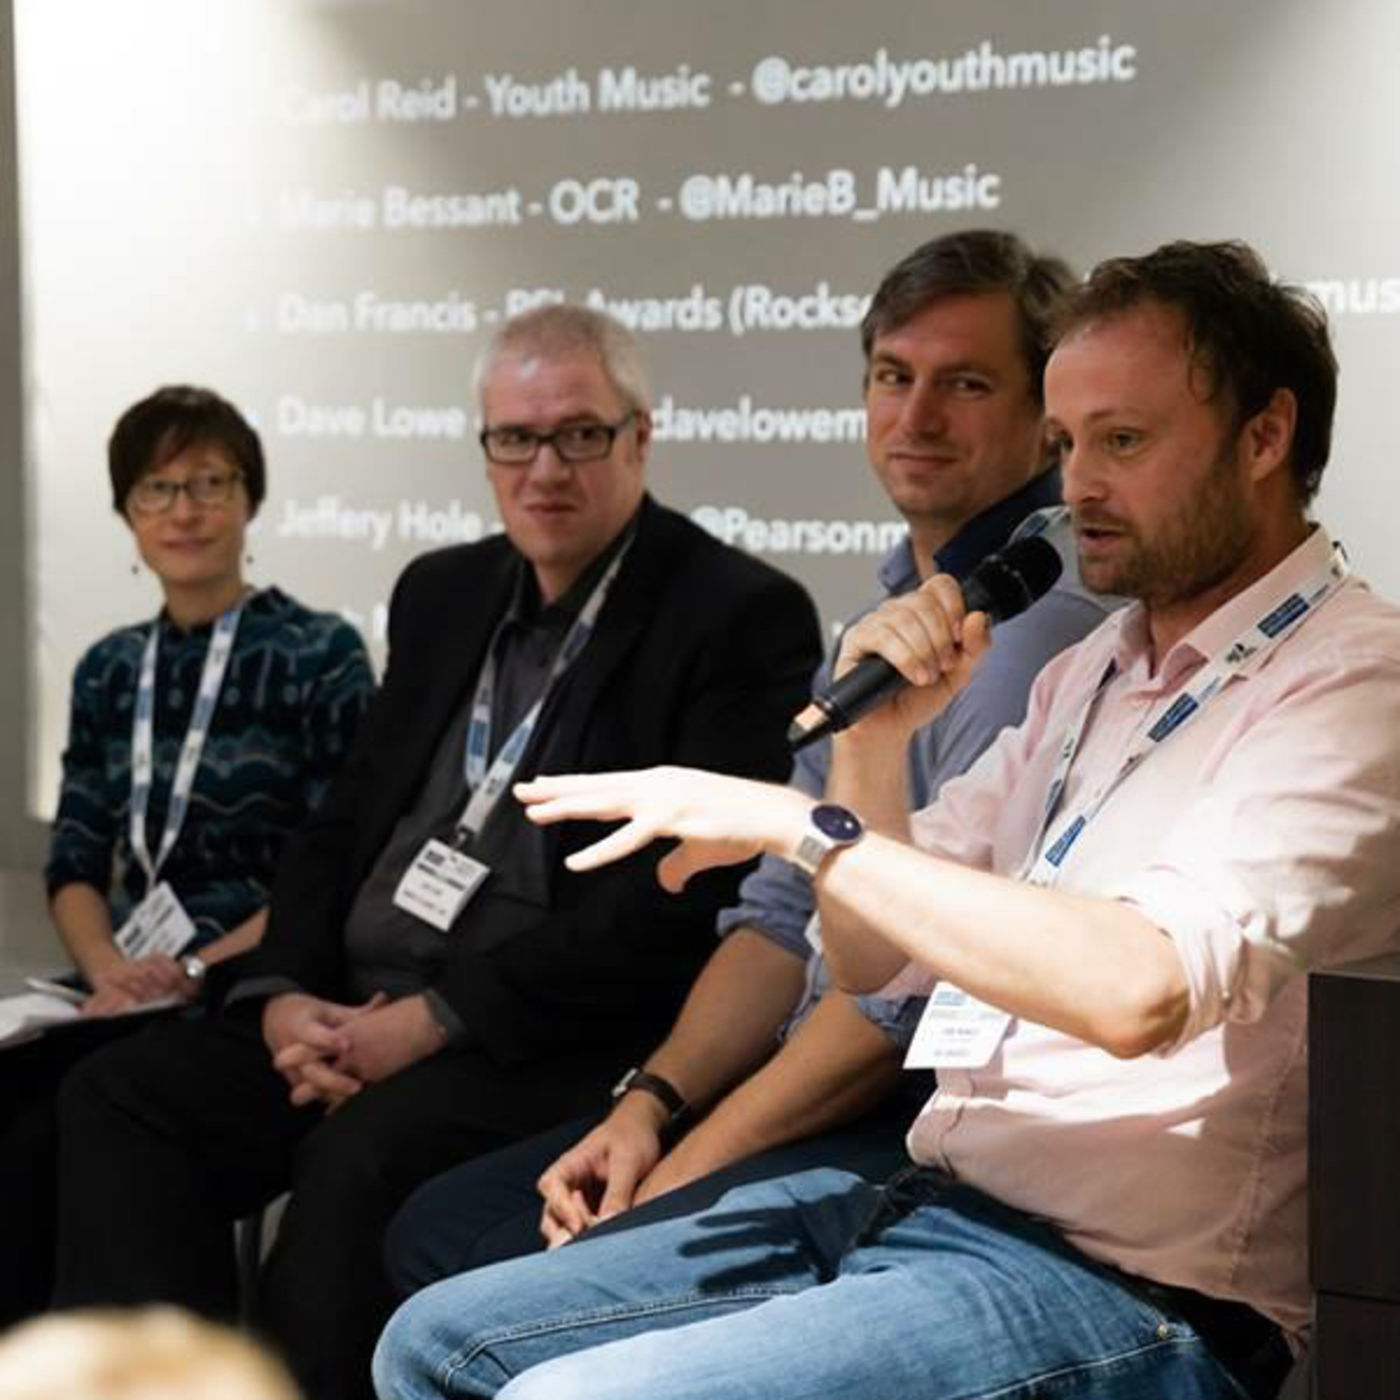 3. Music Education Expo Panel Debate - 'Supporting the 21st Century Musician'